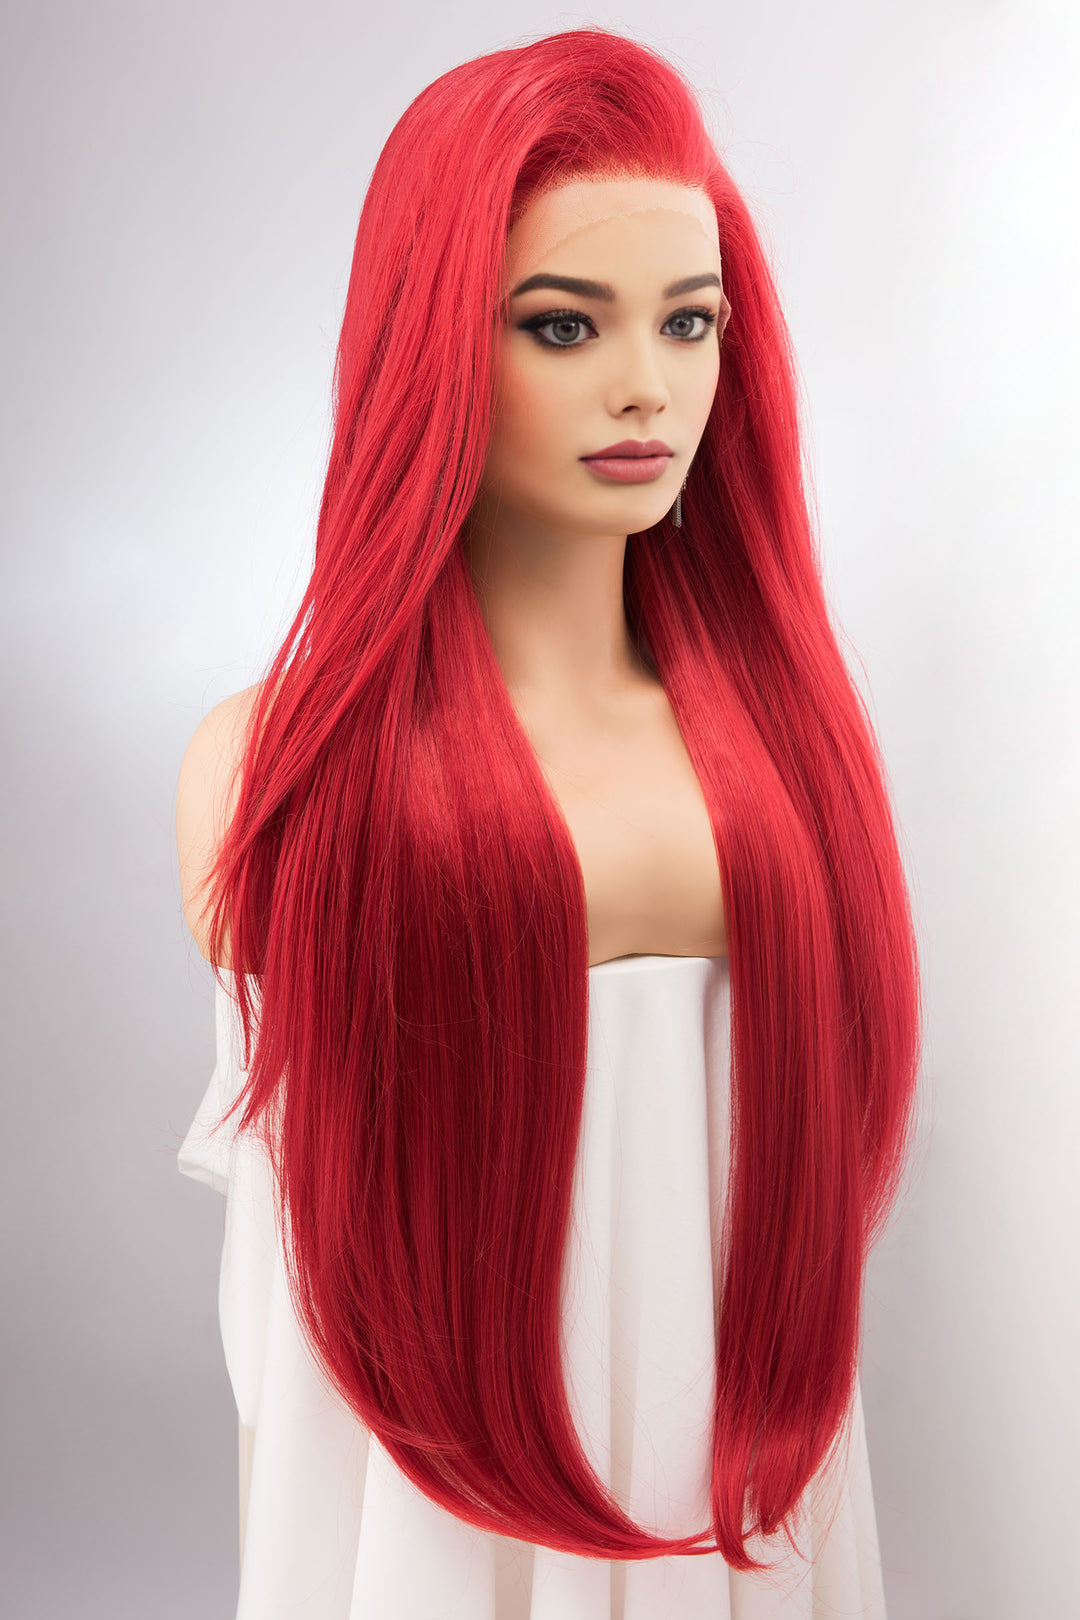 Red Wig Long Red Lace Wig Hollywood Glamour Wig Red Little Mermaid Wig Mera Wig Cosplay Wig Drag Queen Wig Aitana